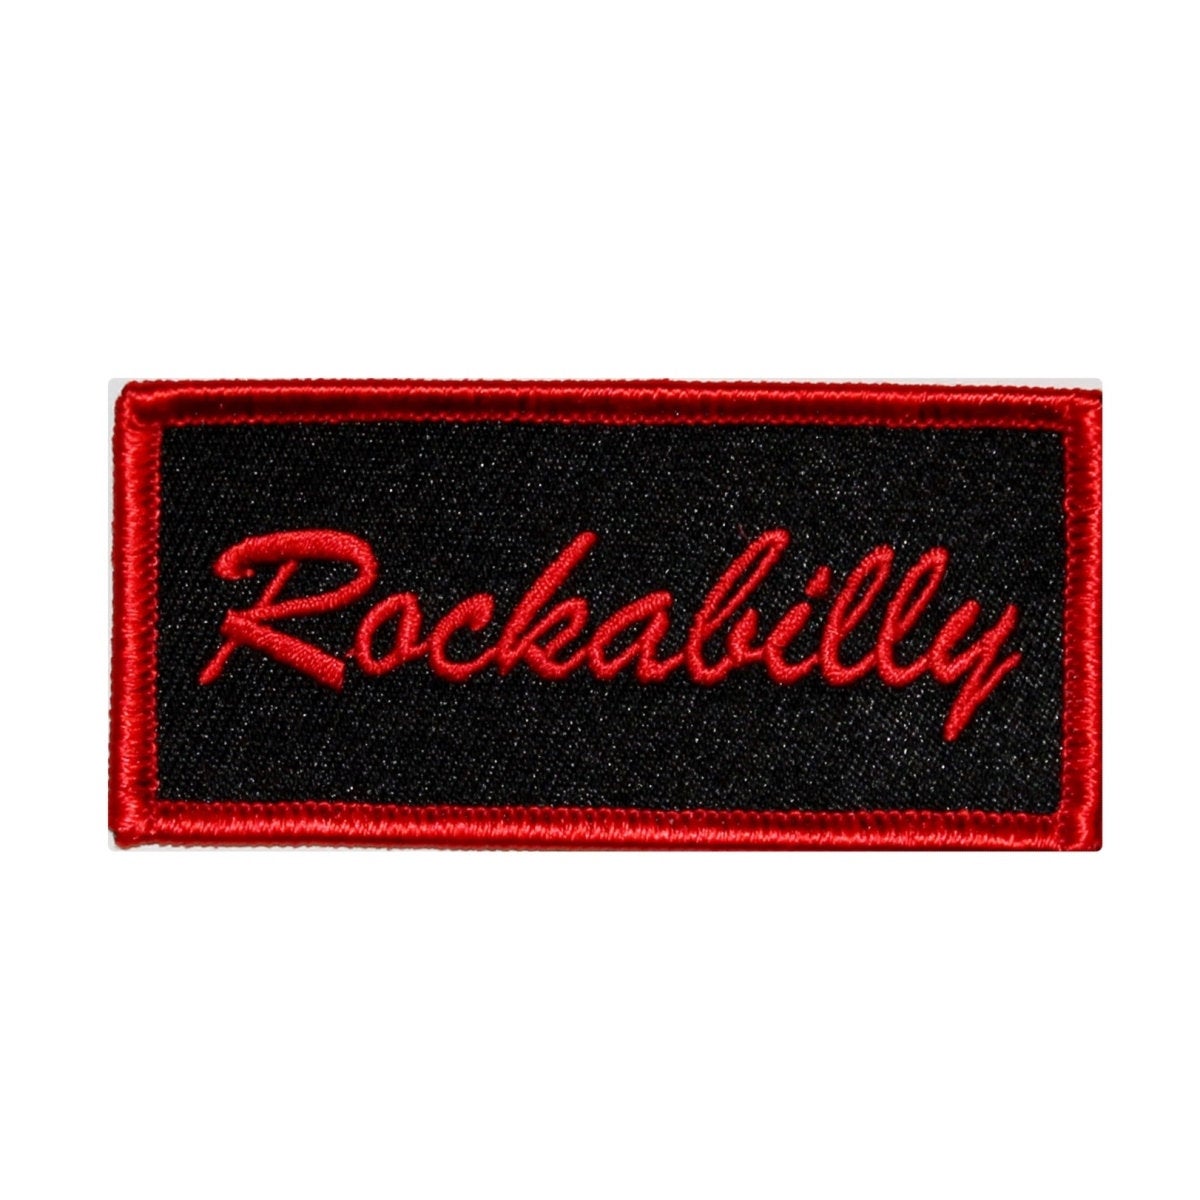 Iron-on Patch Rockabilly rules